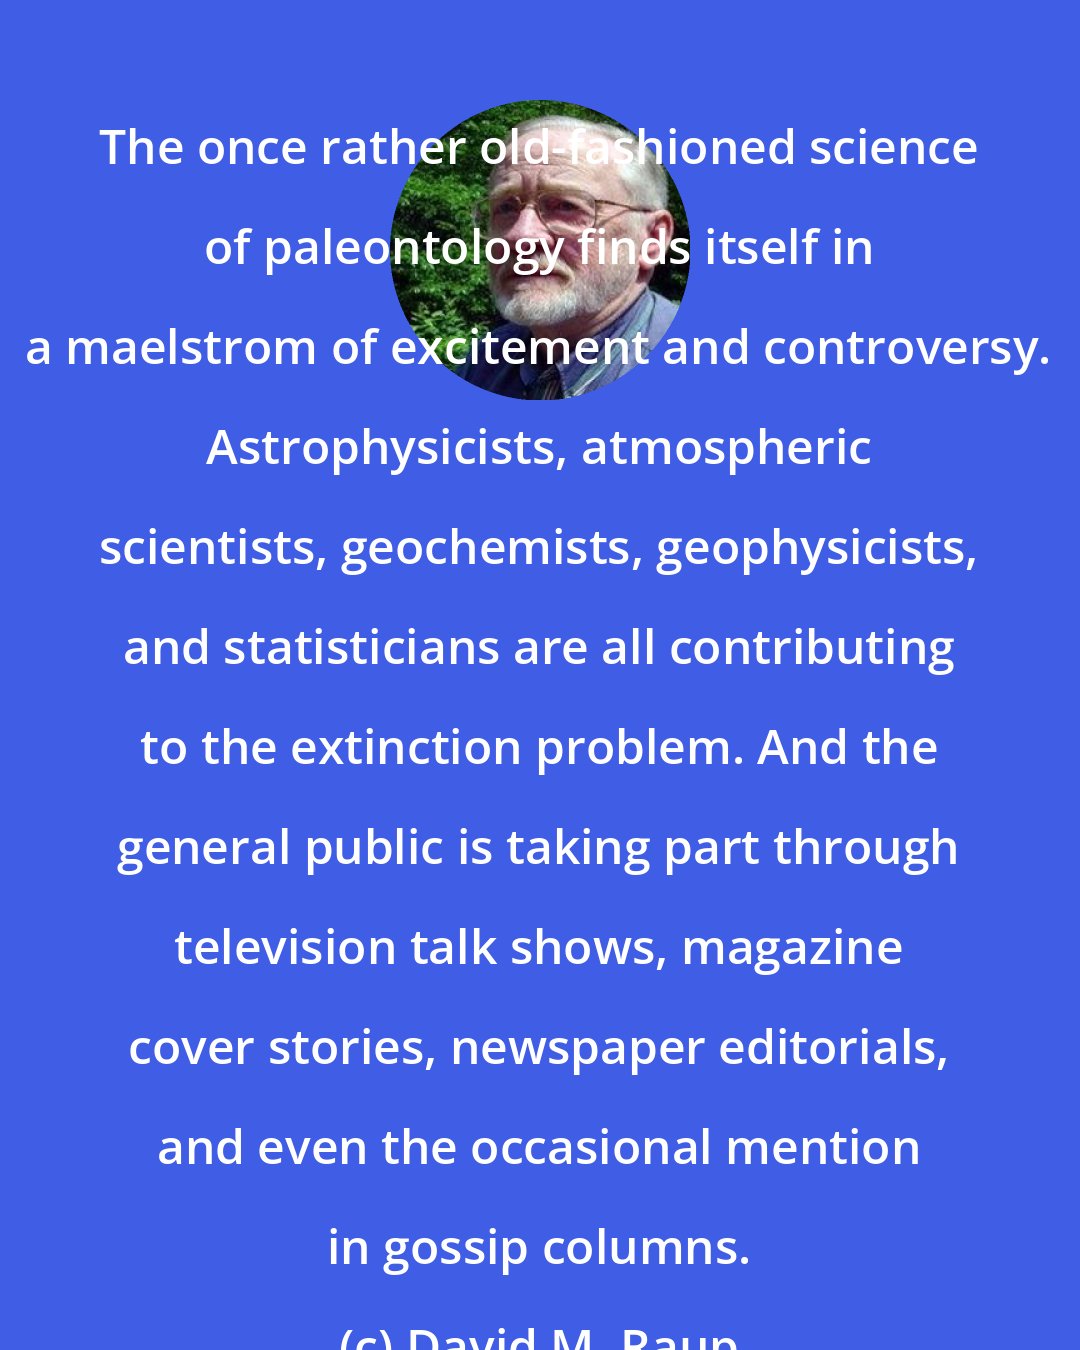 David M. Raup: The once rather old-fashioned science of paleontology finds itself in a maelstrom of excitement and controversy. Astrophysicists, atmospheric scientists, geochemists, geophysicists, and statisticians are all contributing to the extinction problem. And the general public is taking part through television talk shows, magazine cover stories, newspaper editorials, and even the occasional mention in gossip columns.